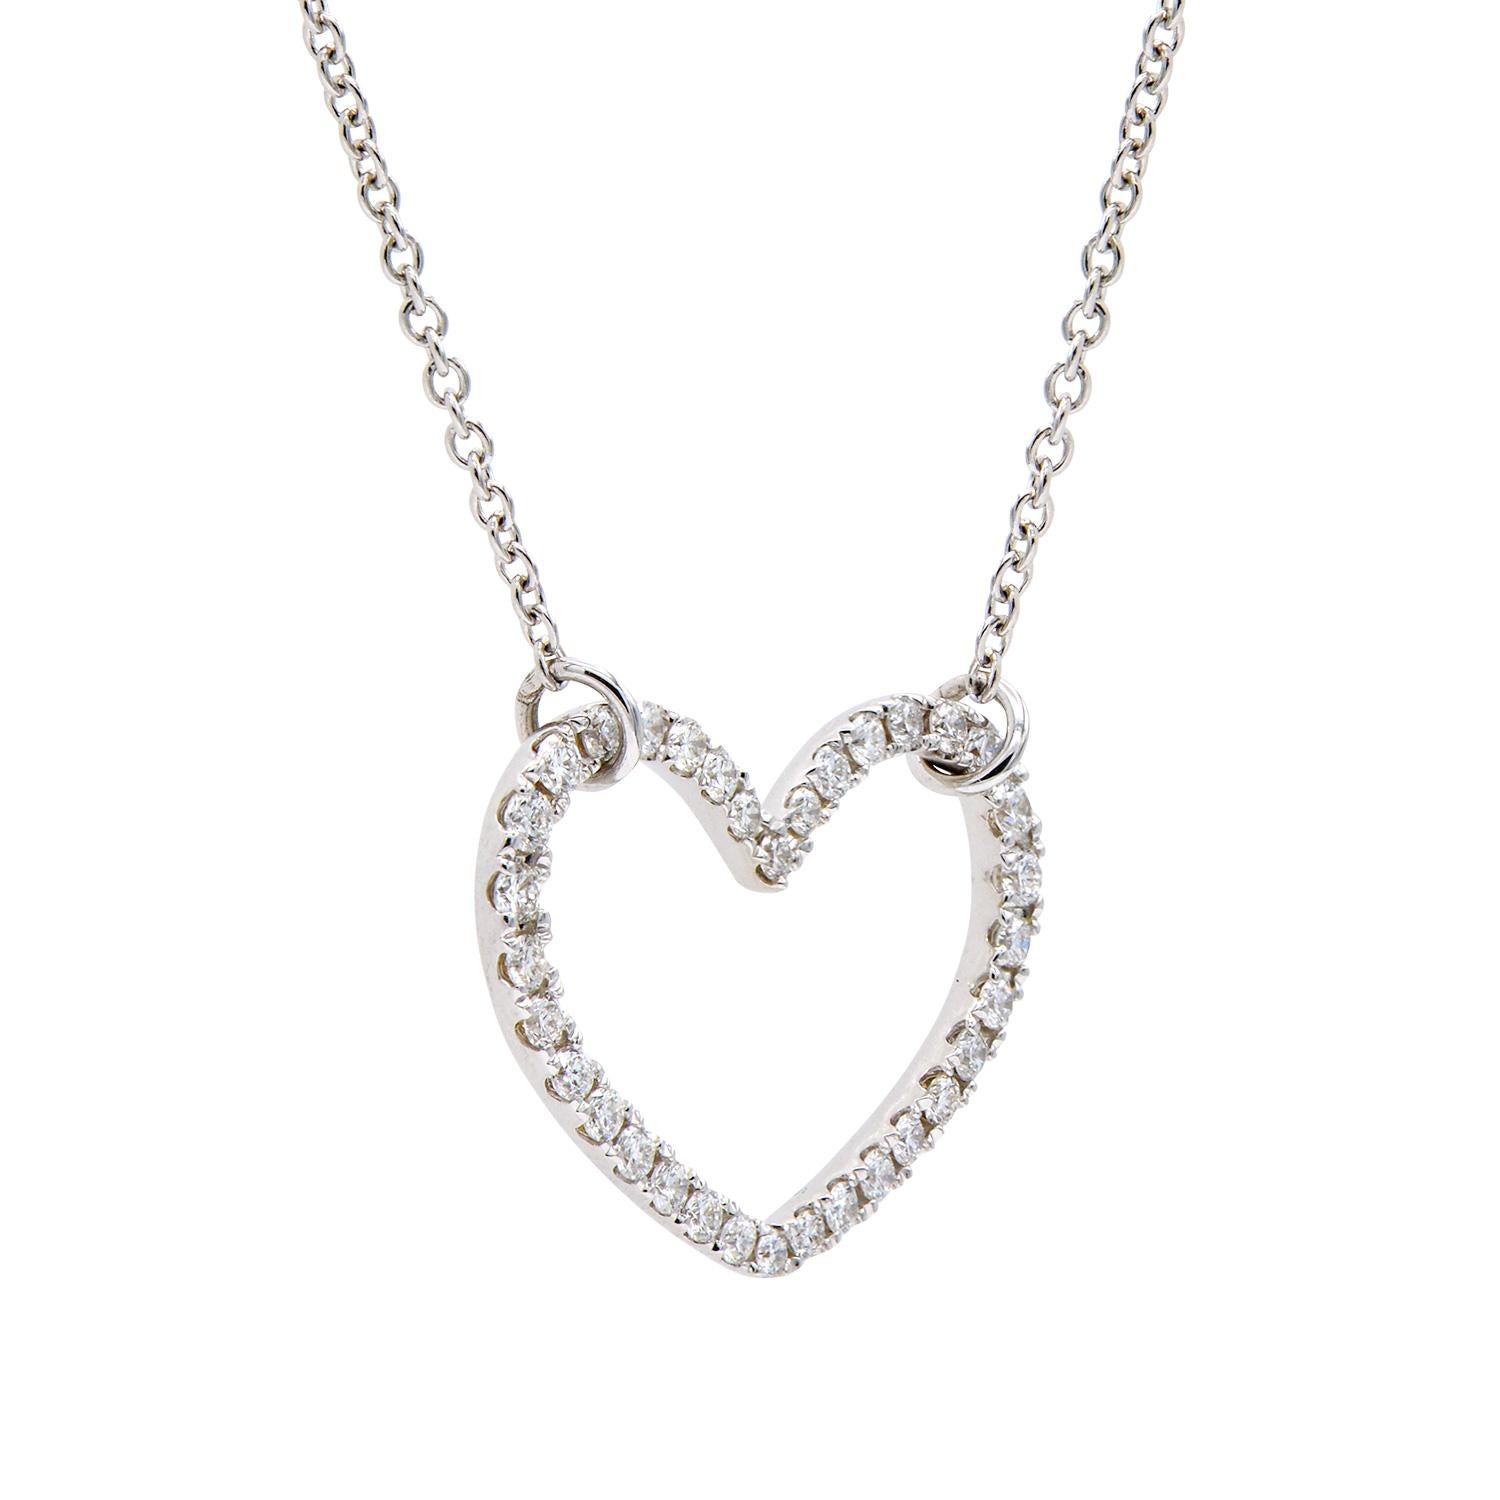 Show your love with this beautiful 18 karat white gold heart necklace enhanced with sparkling stunning diamonds. Each heart contains 34 round VS2, G color diamonds that total 0.32 carats which are set in 3.0 grams of white gold. Attached is an 18